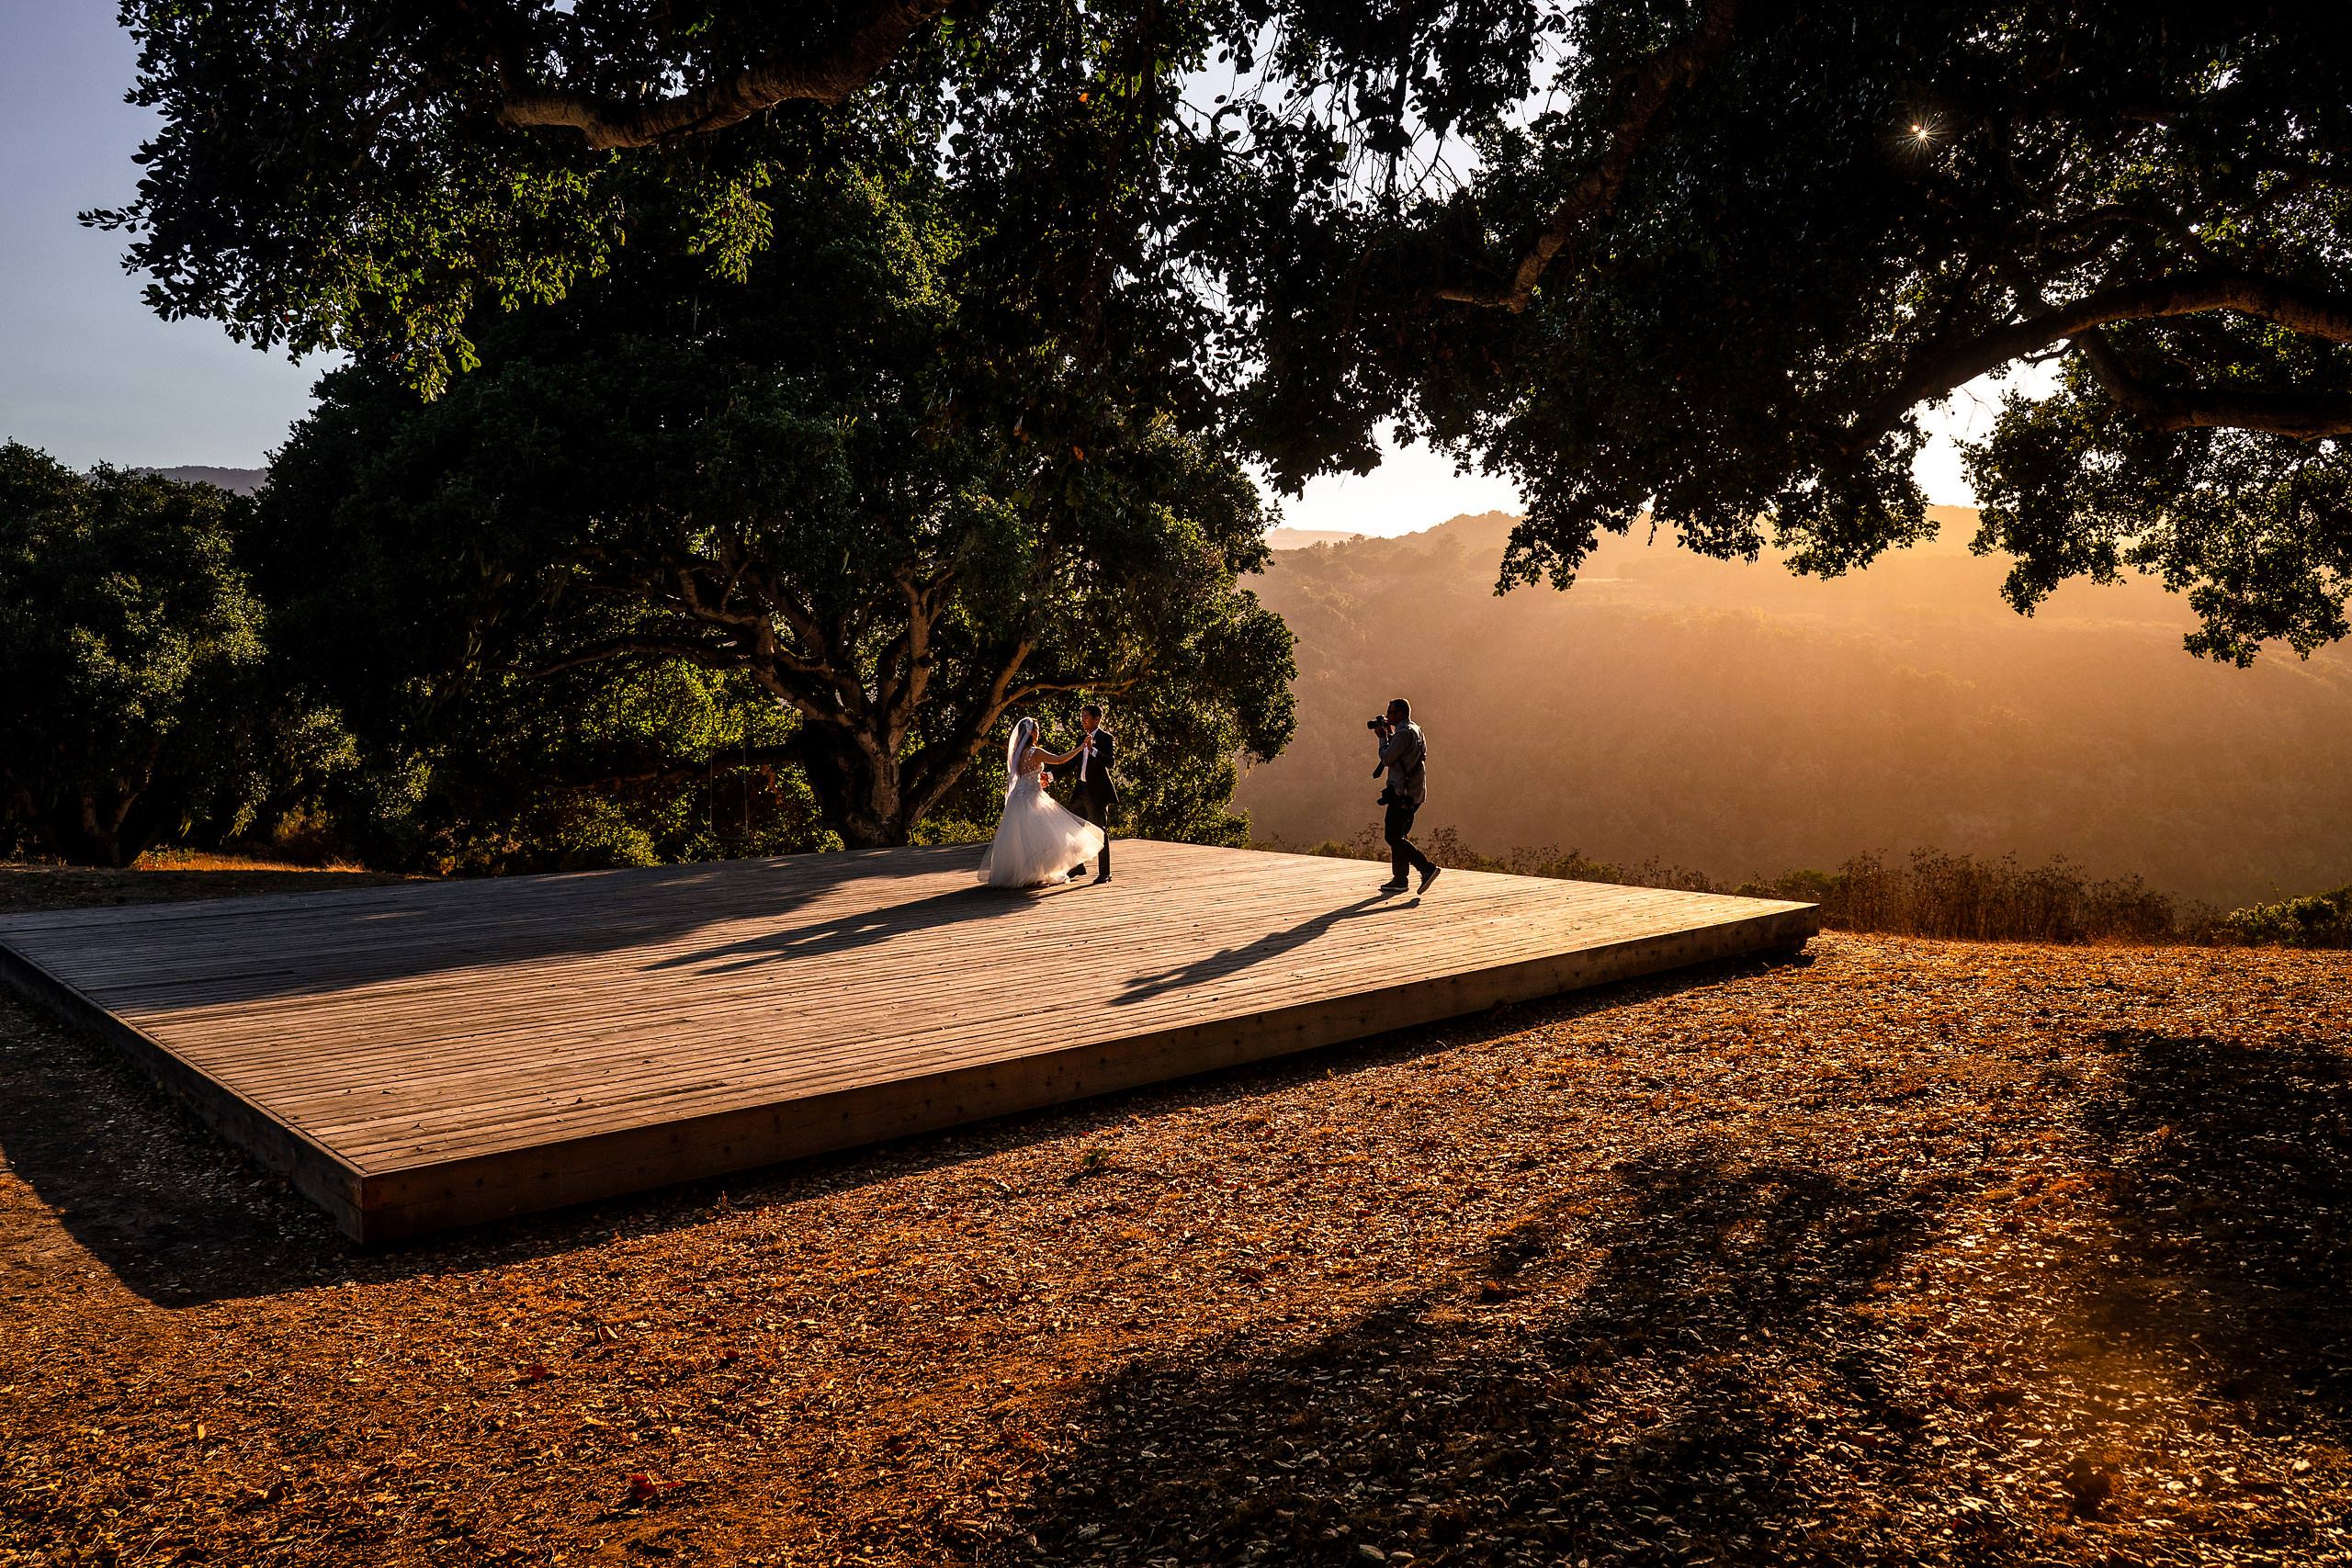 A photographer and a bride and groom on a wooden platform at sunset in California